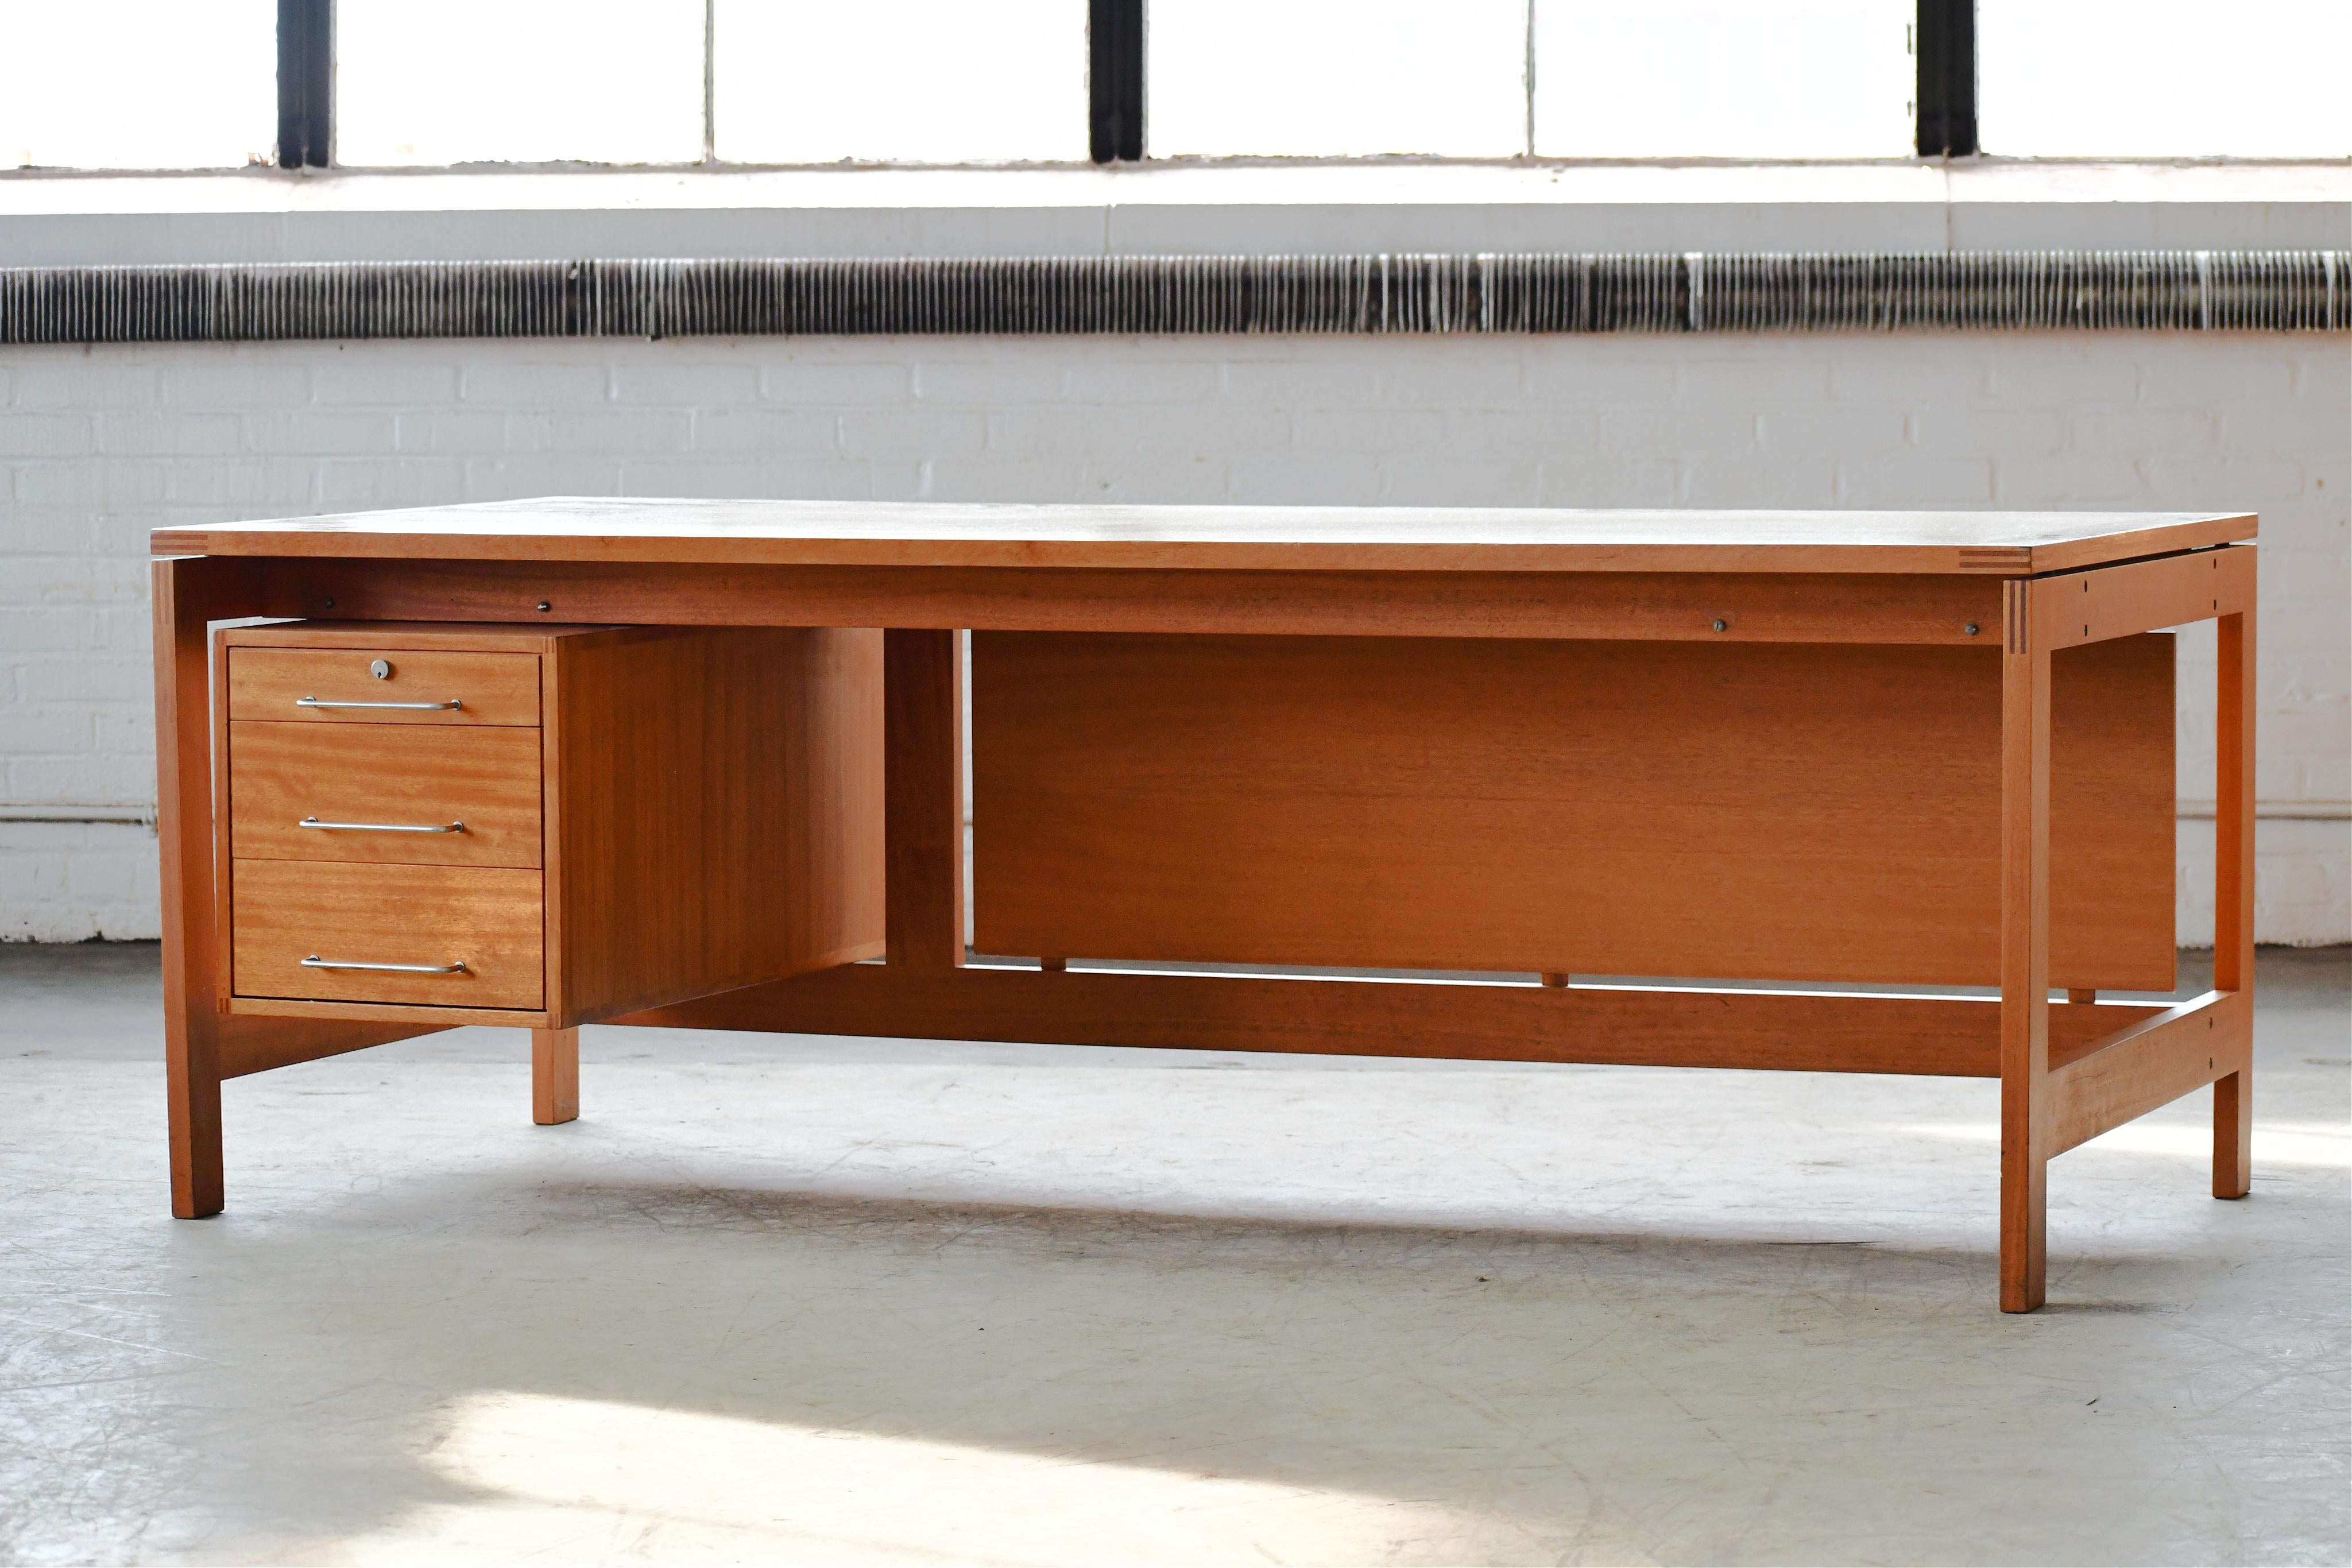 Very attractive large writing desk designed by Henning Jensen & Torben Valeur circa 1970 as model M40 for Munch Møbler, Denmark. High quality solid build in a beautiful light mahogany with contrasting edges and metal pulls. Sharp precise design